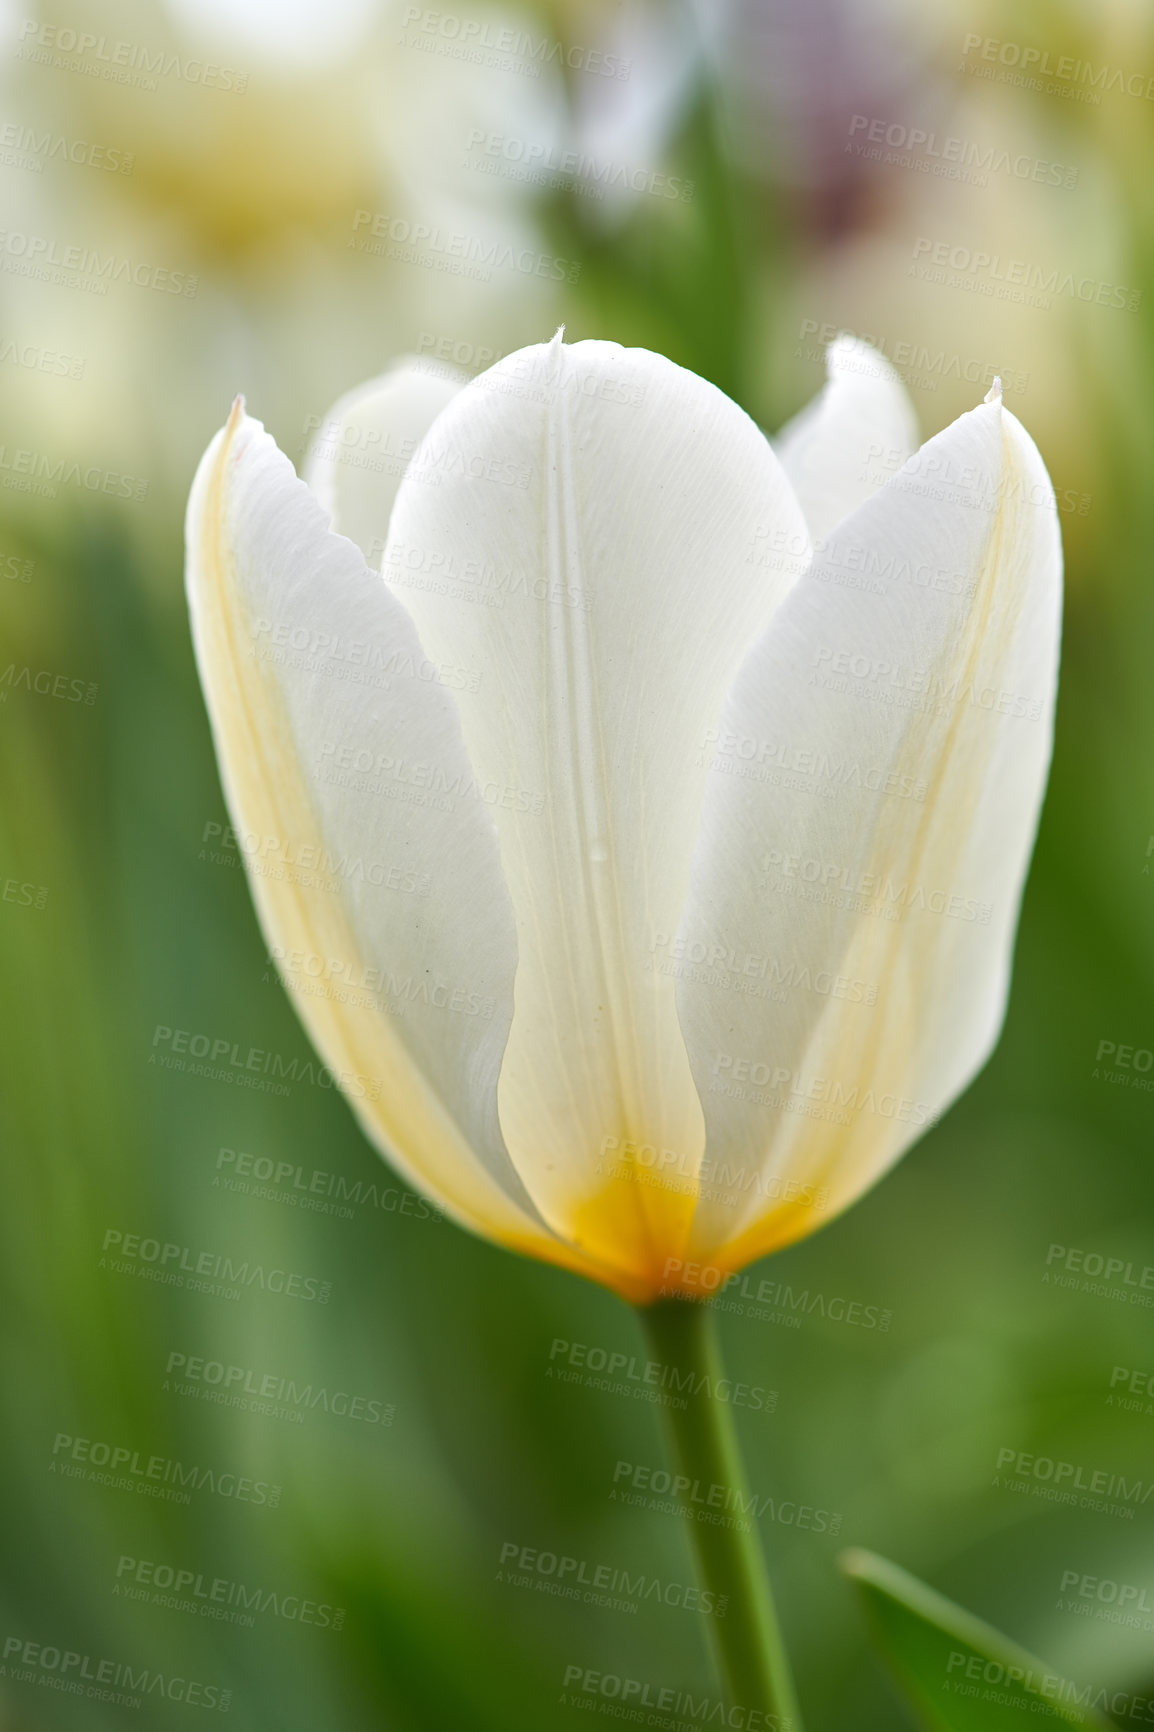 Buy stock photo Closeup of white Tulip flower petals summers day in a garden with copyspace. Zoom in on seasonal flowers growing in a field. Details, texture and natures pattern of a flowerhead 